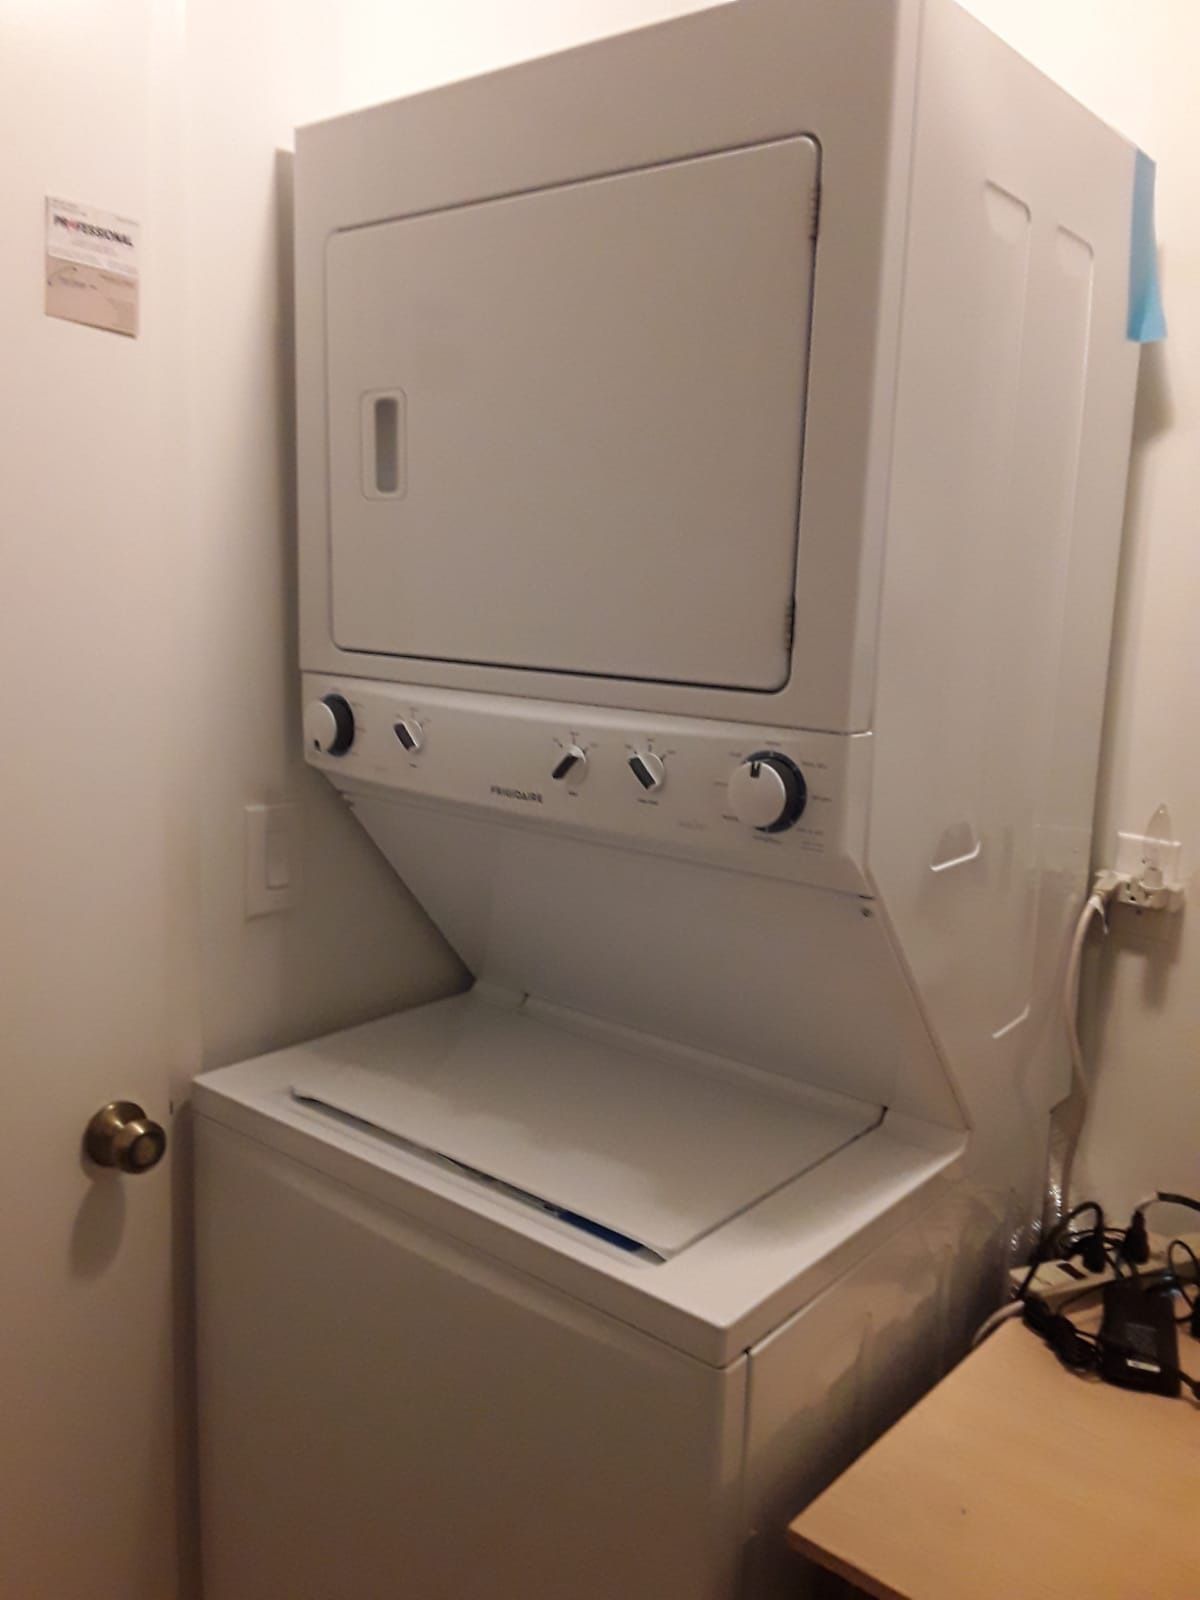 Frigidaire Stackable Washer/Dryer combo